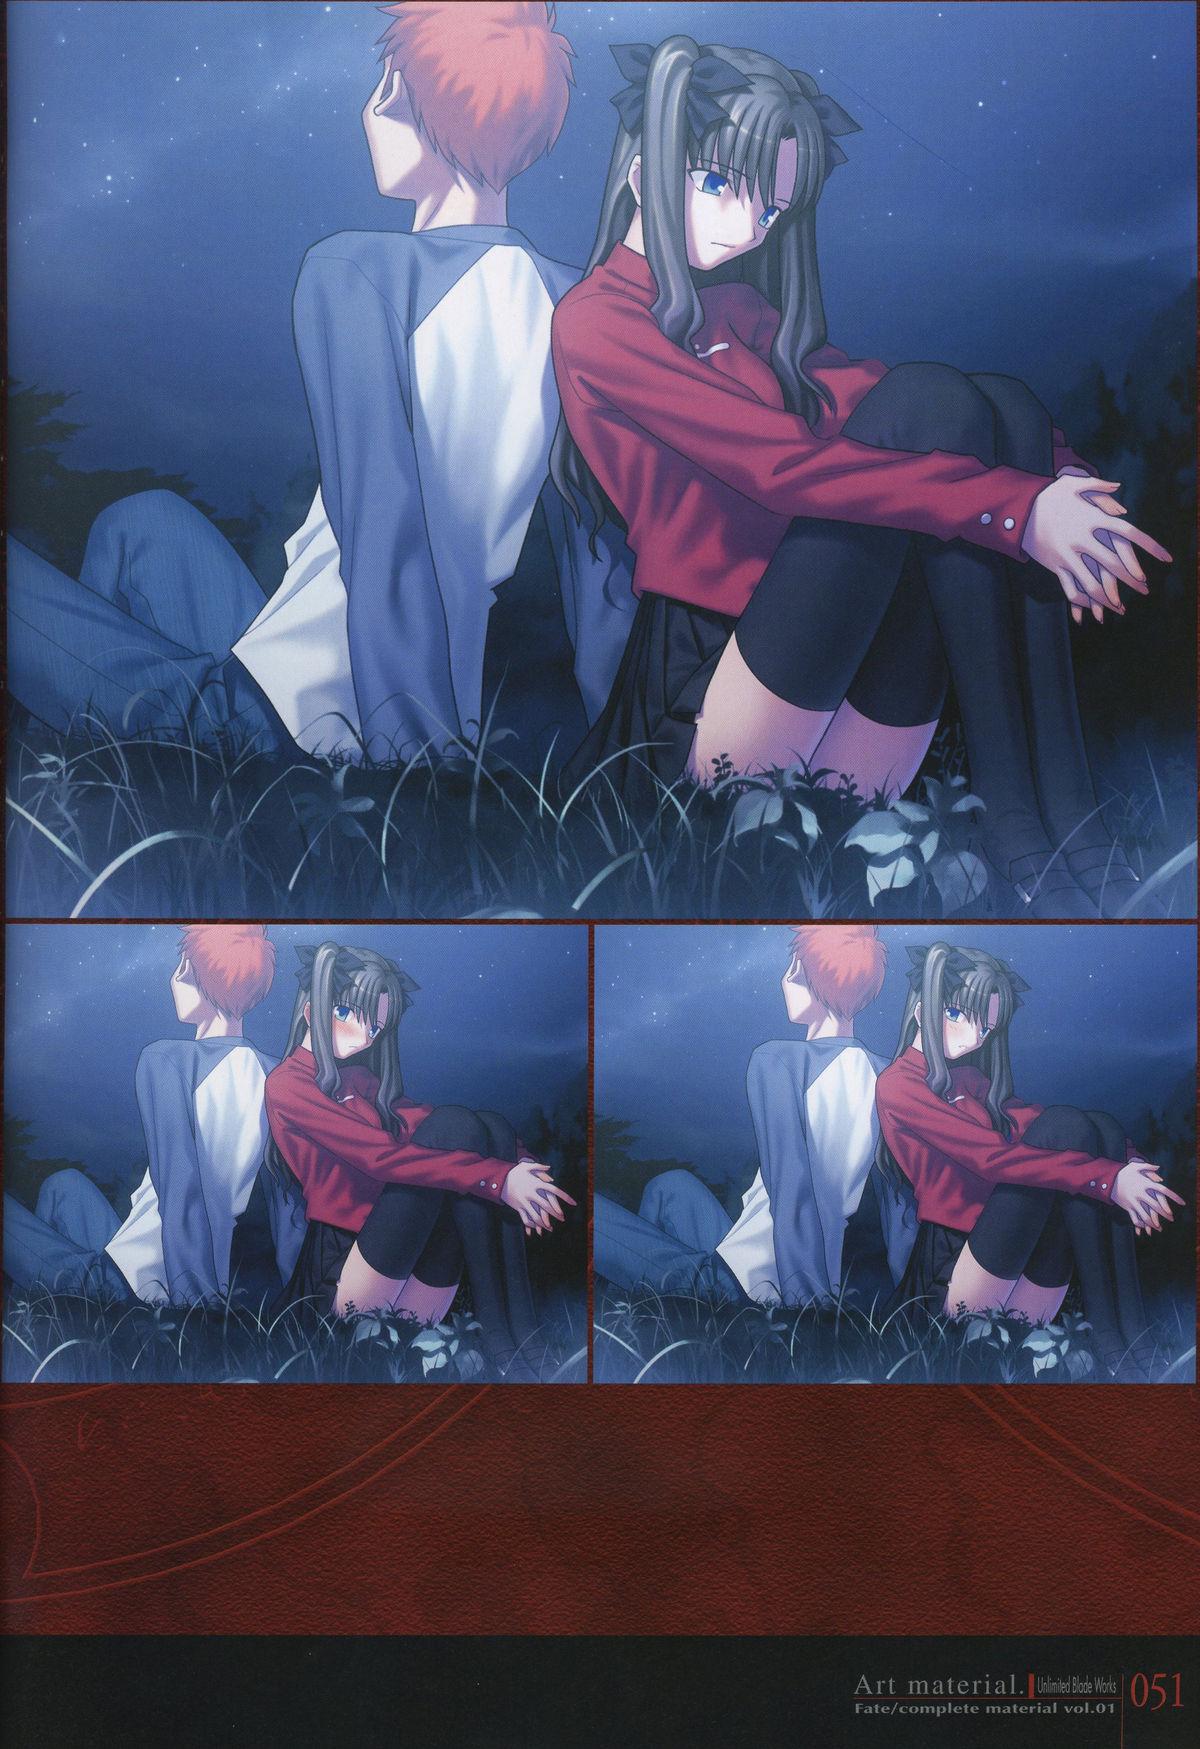 Fate/complete material I - Art material. 55